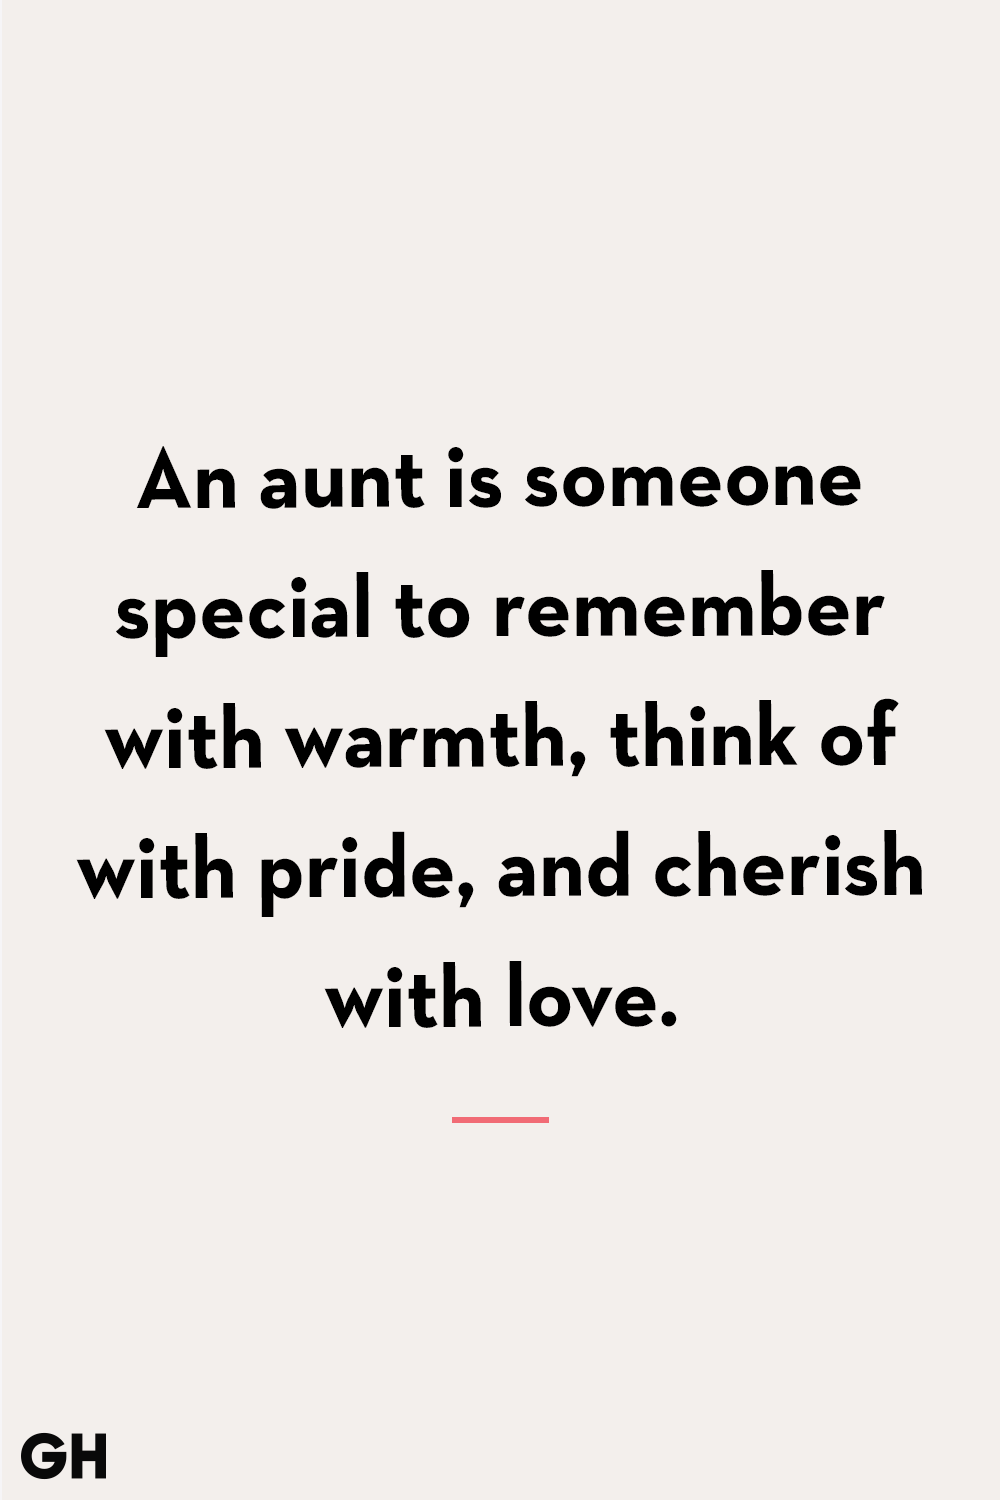 nephew quotes from aunt